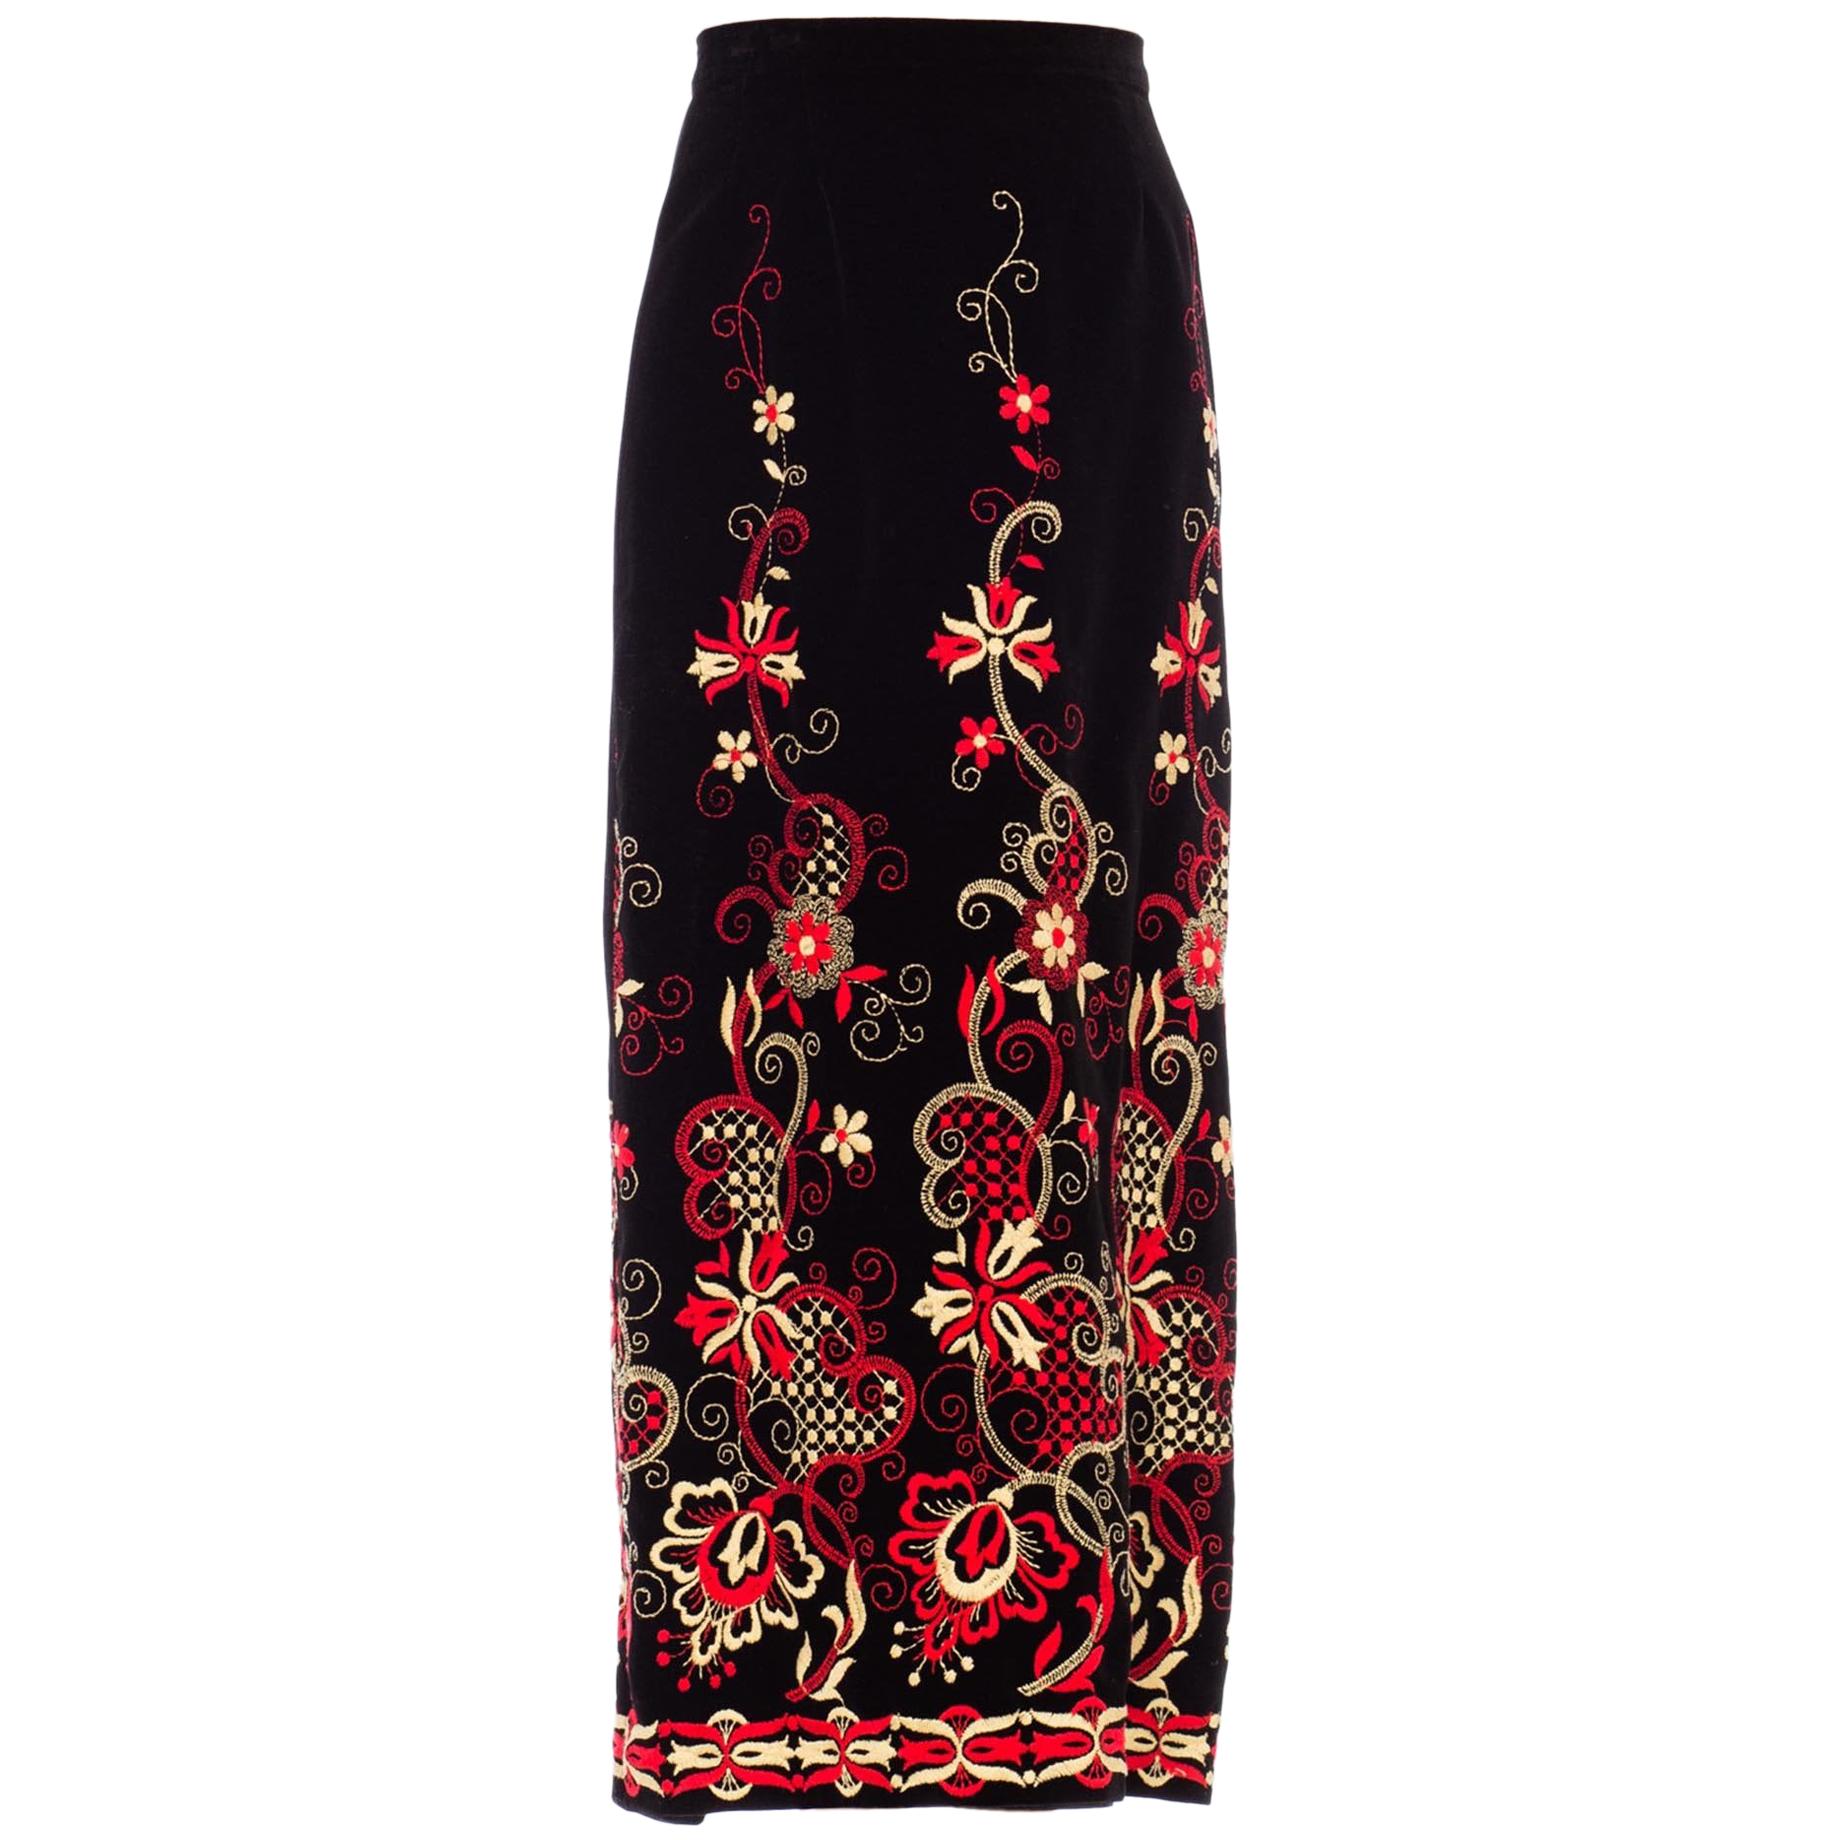 1960S Black Cotton Velvet Maxi Skirt With Red And White Floral Embroidery